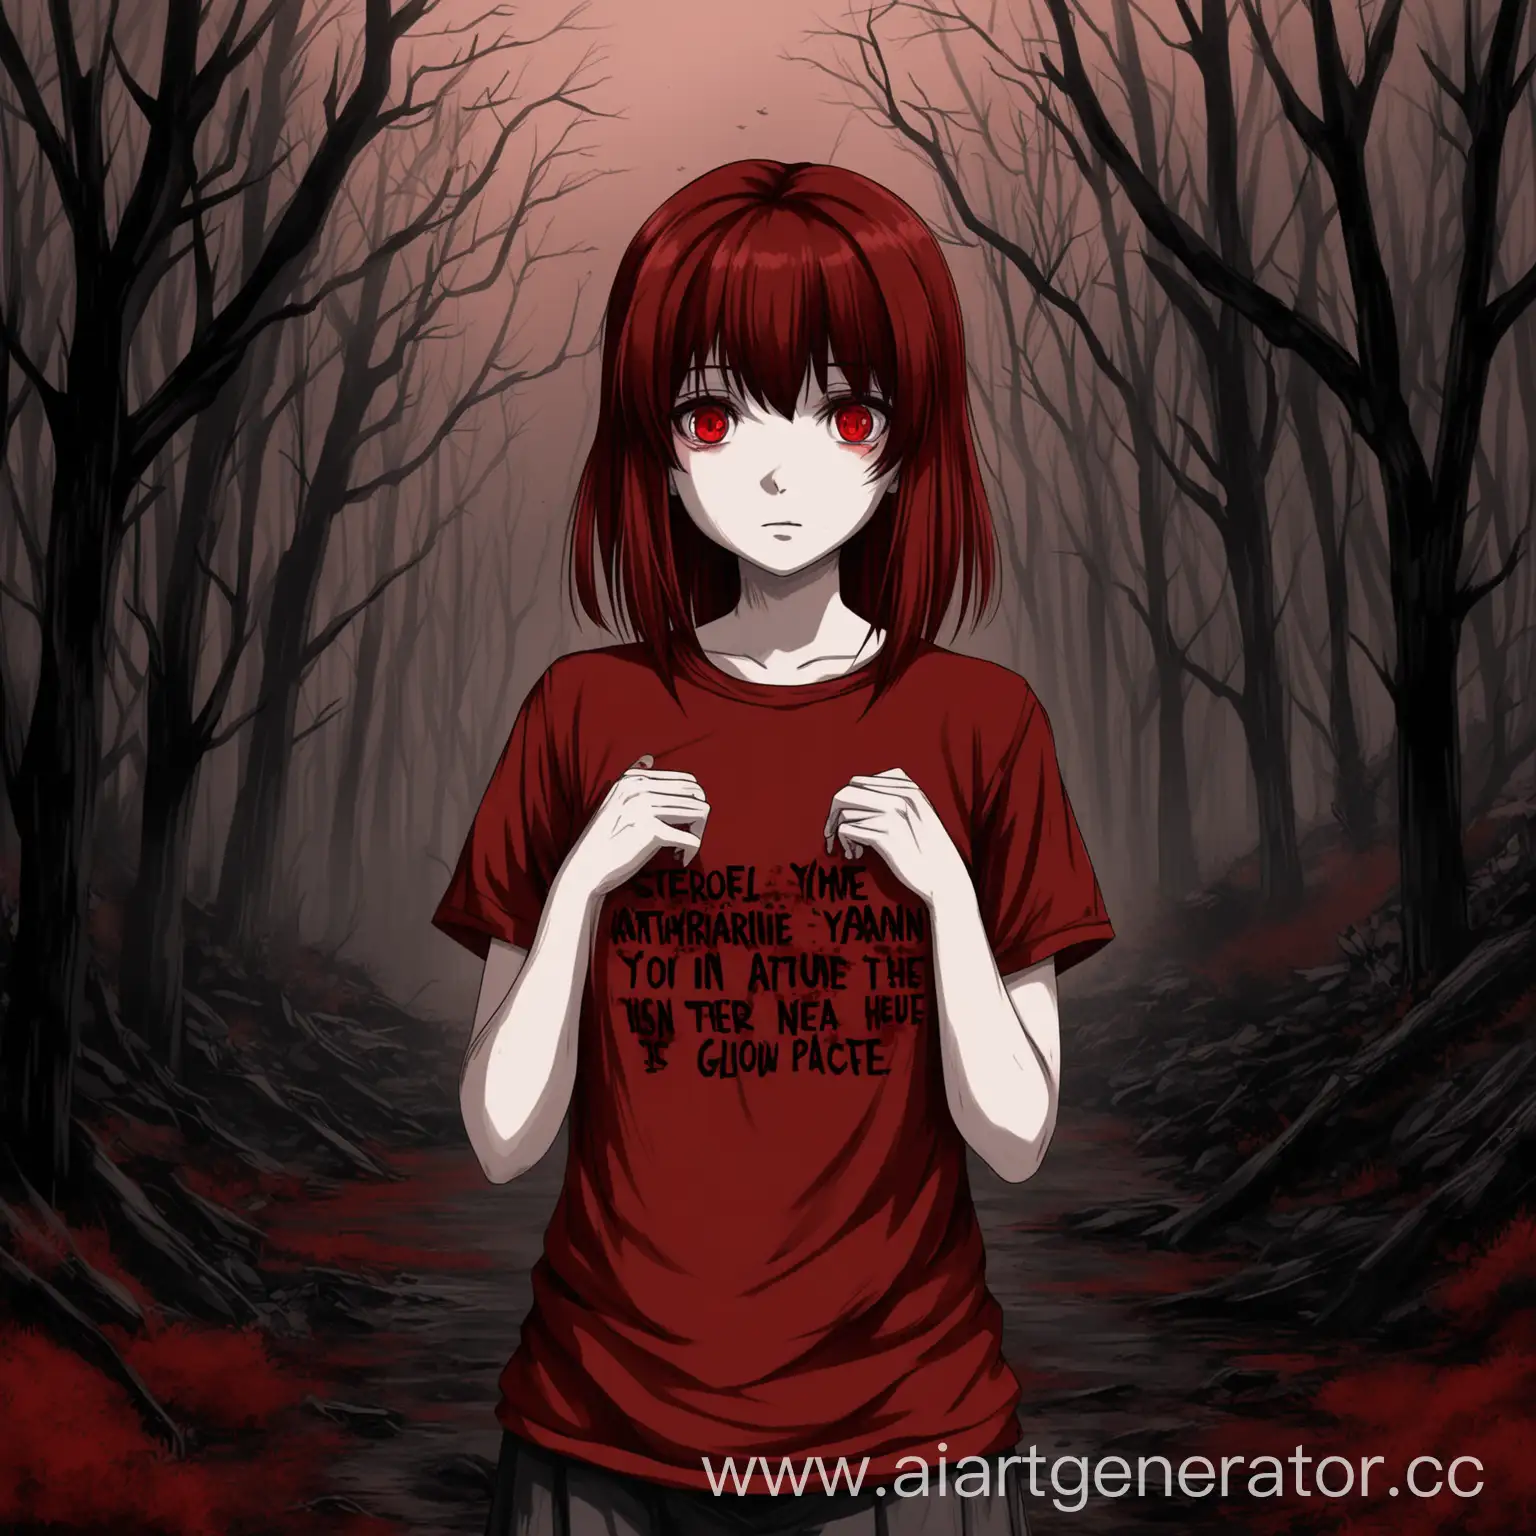 Gloomy-Anime-Tyan-in-Nature-Red-Inscription-on-Hands-or-Tshirt